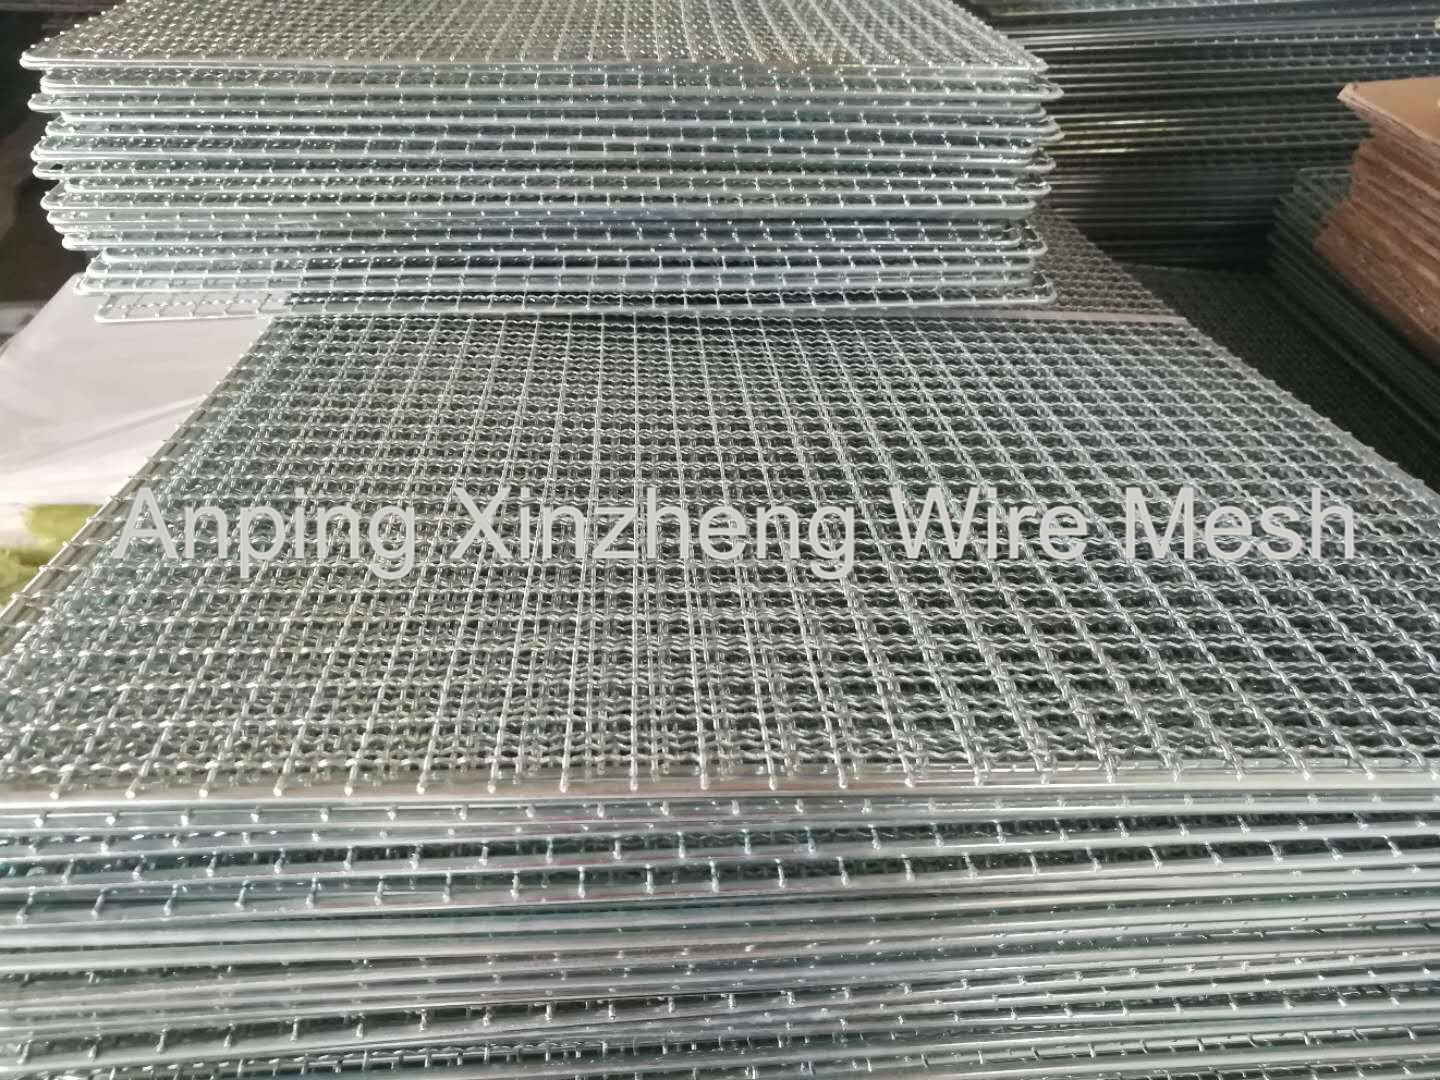 Barbecue Net